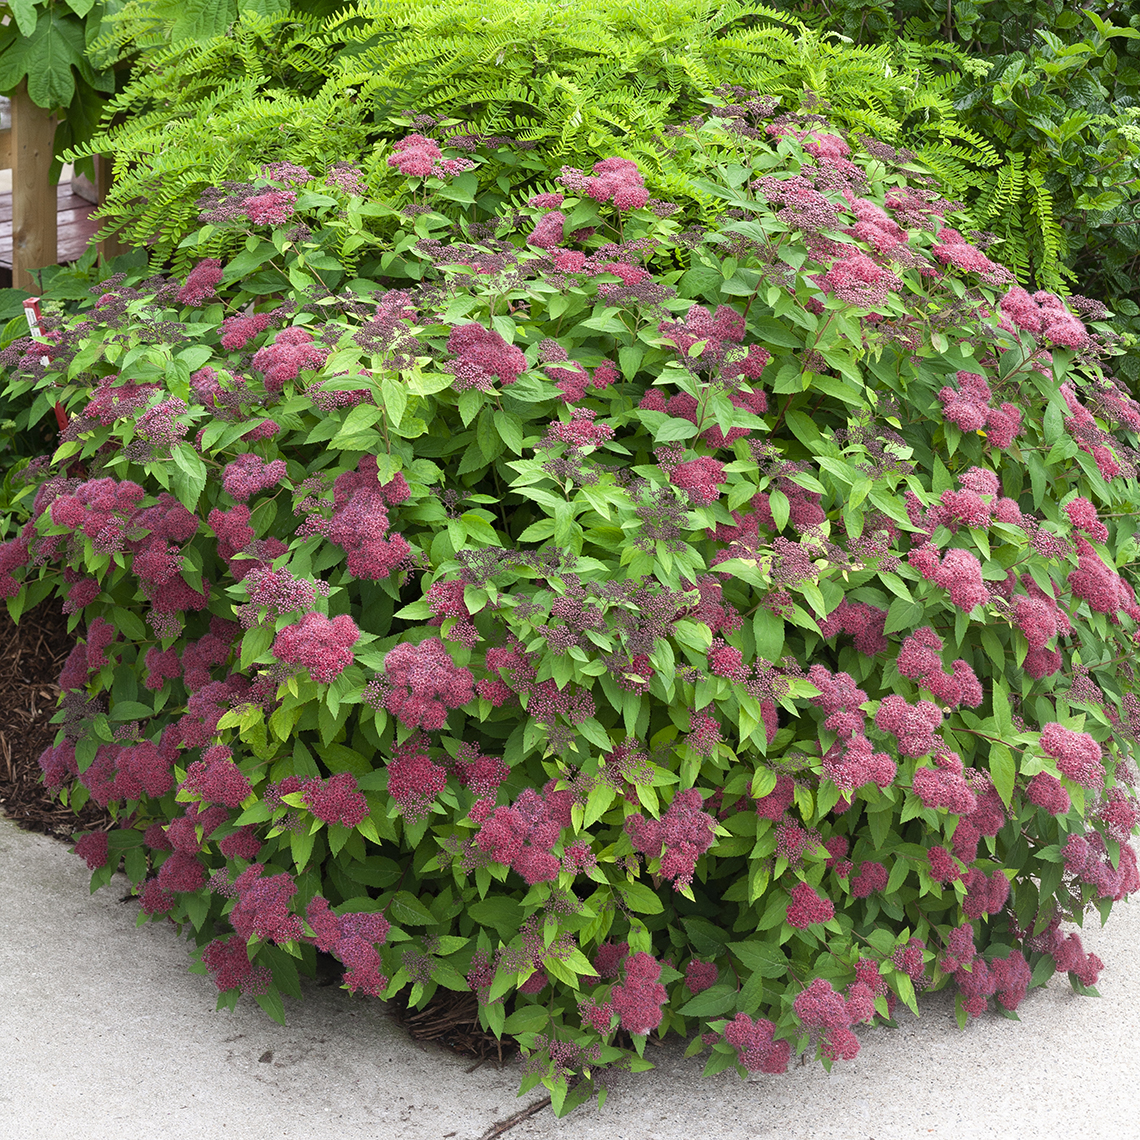 Rounded Double Play Red Spiraea at corner of garden bed